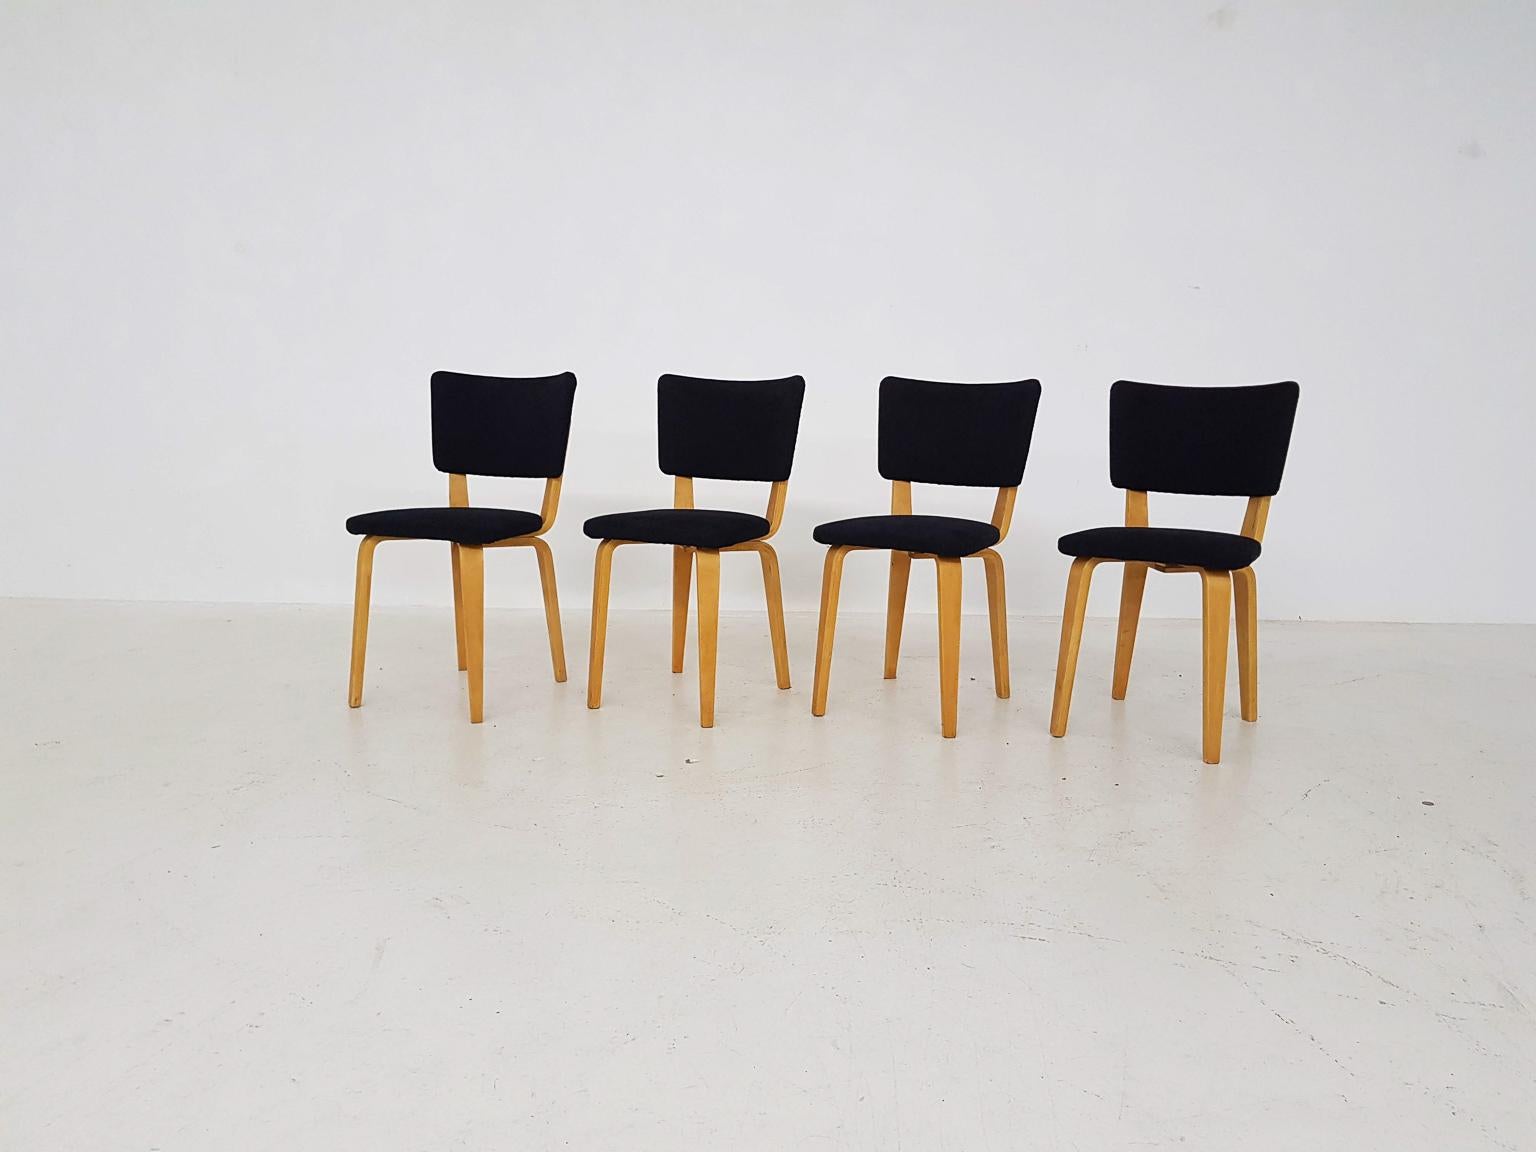 Dining chairs by the Dutch mid-century designer Cor Alons for Gouda Den Boer the Netherlands, made in the 1950s.

True Dutch design classics and a Fine example how post-war Dutch furniture evolved with new ideas. These chairs are made of plywood